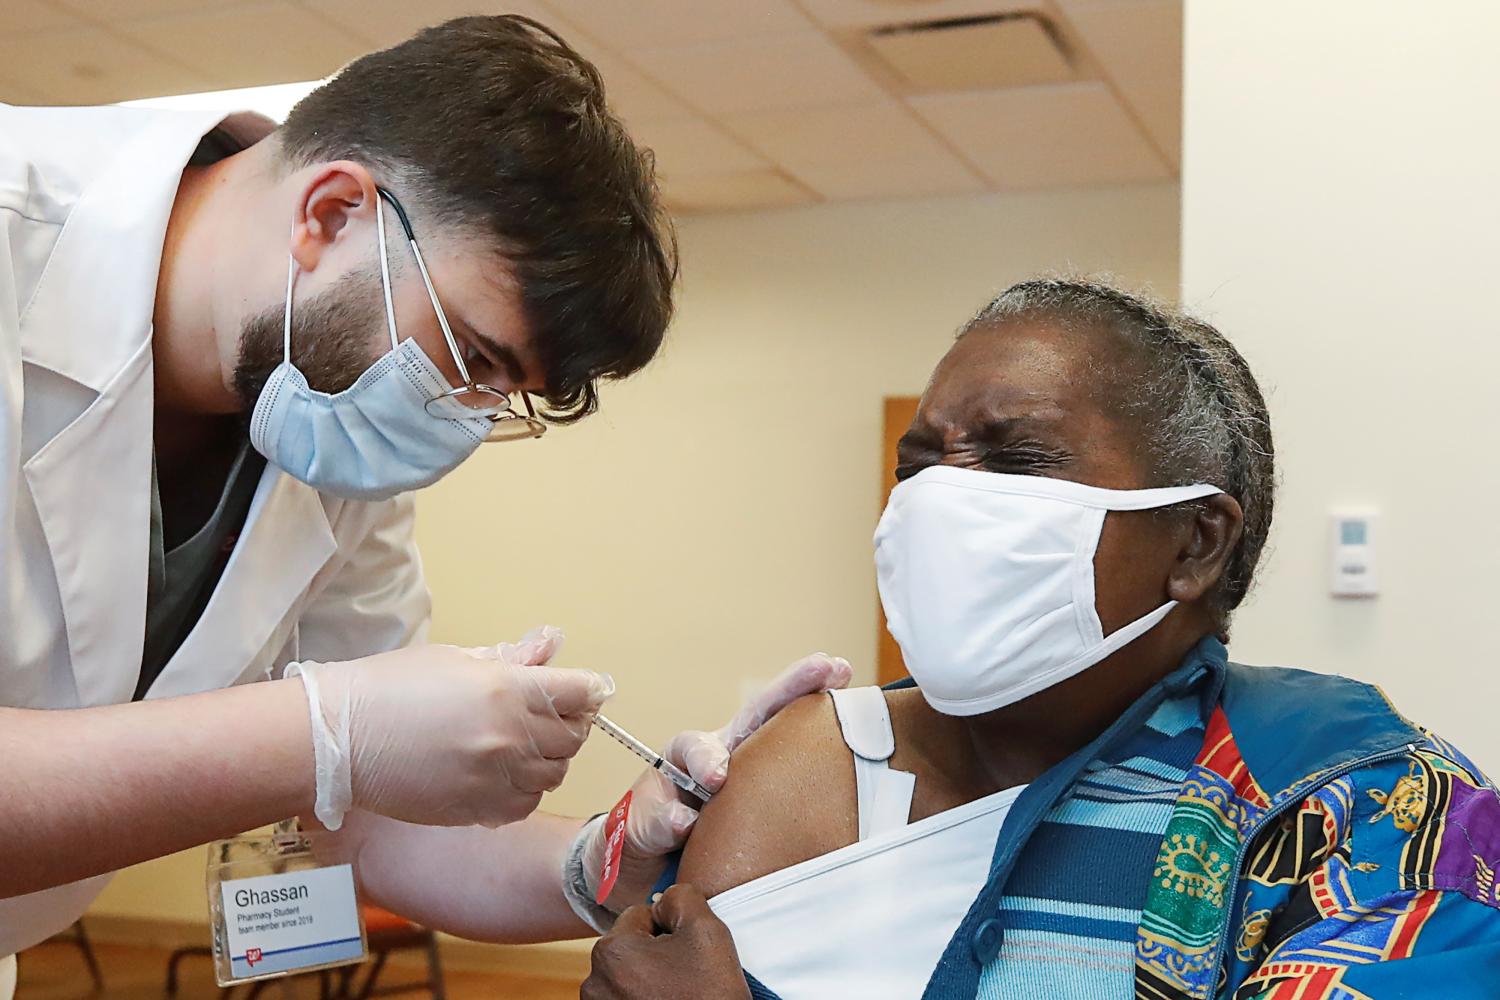 A senior citizen receives an injection of a COVID-19 vaccine.